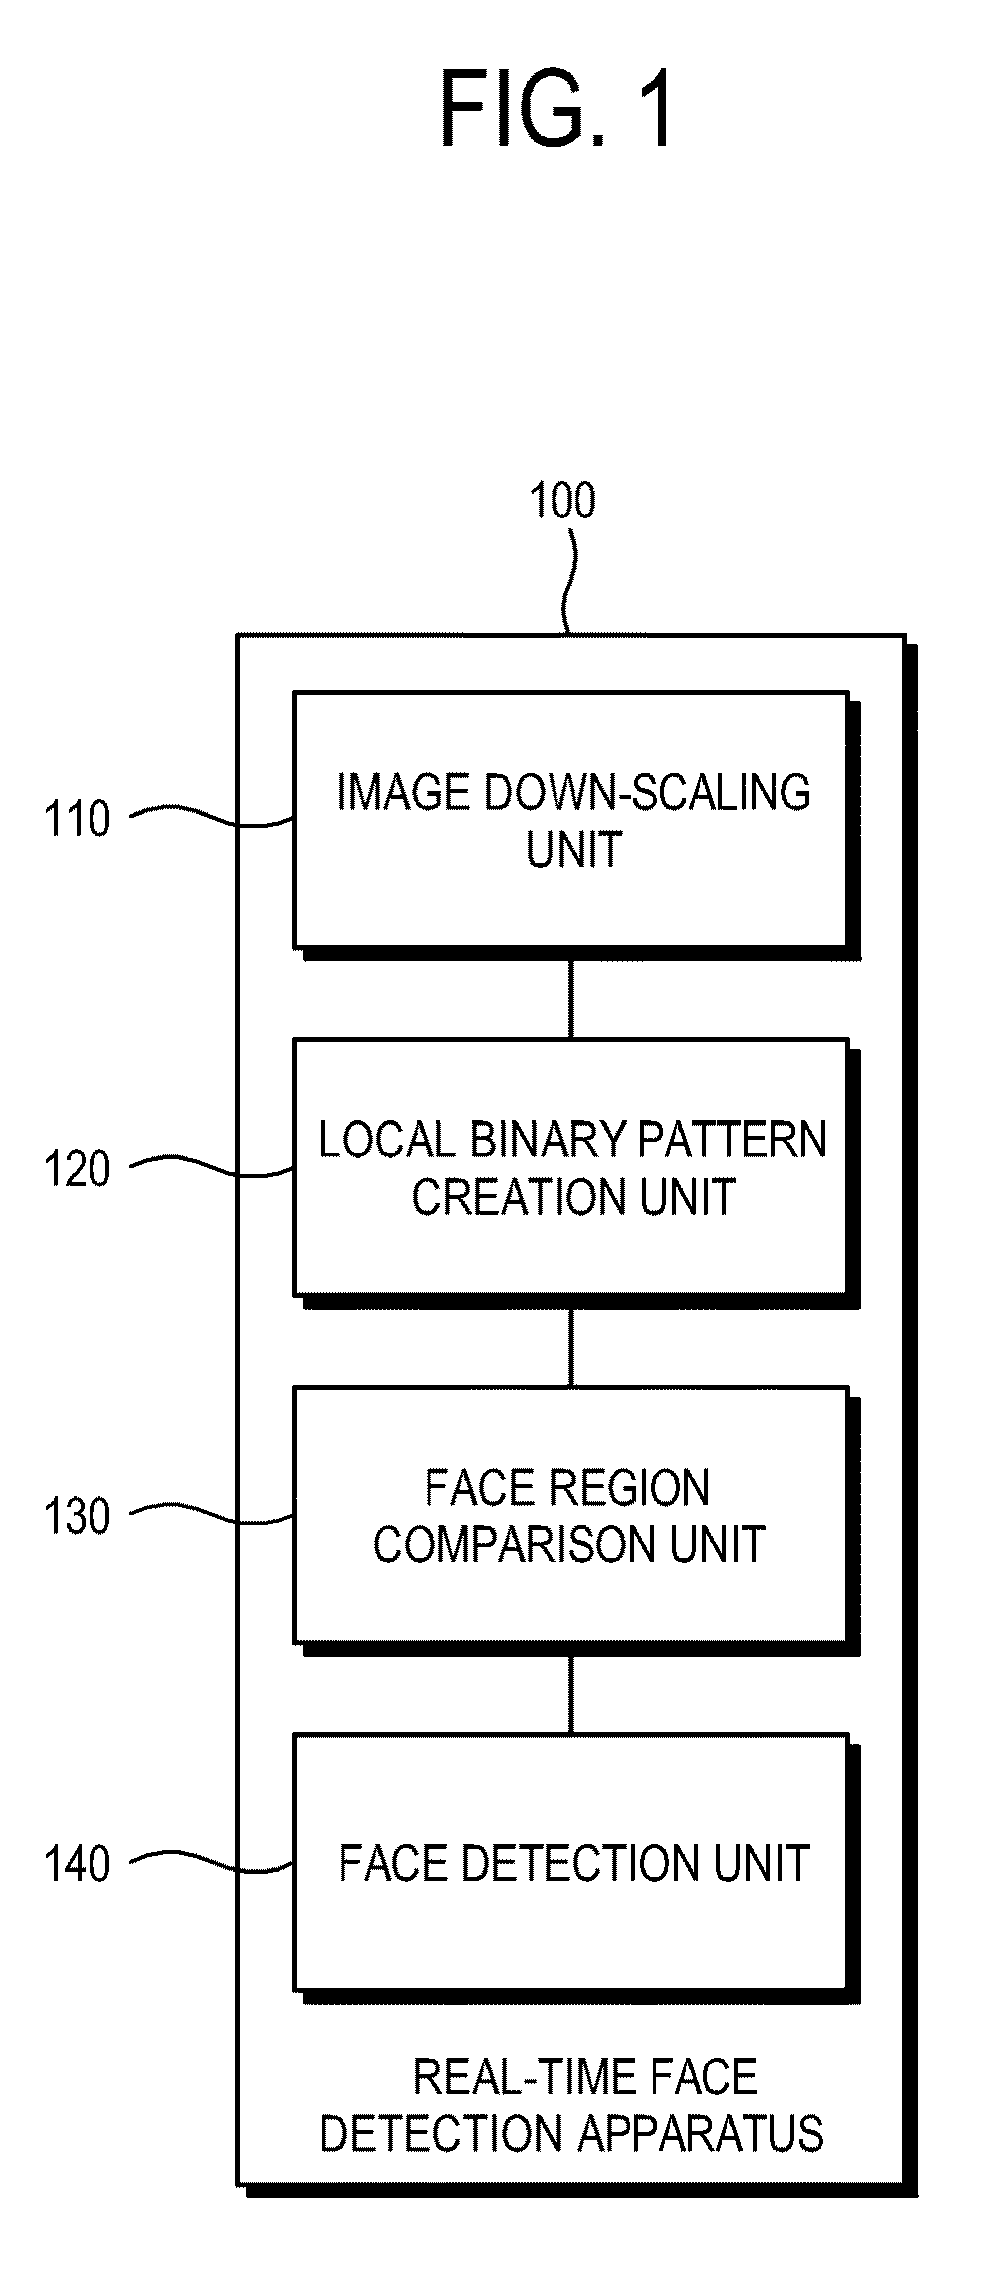 Real-time face detection apparatus